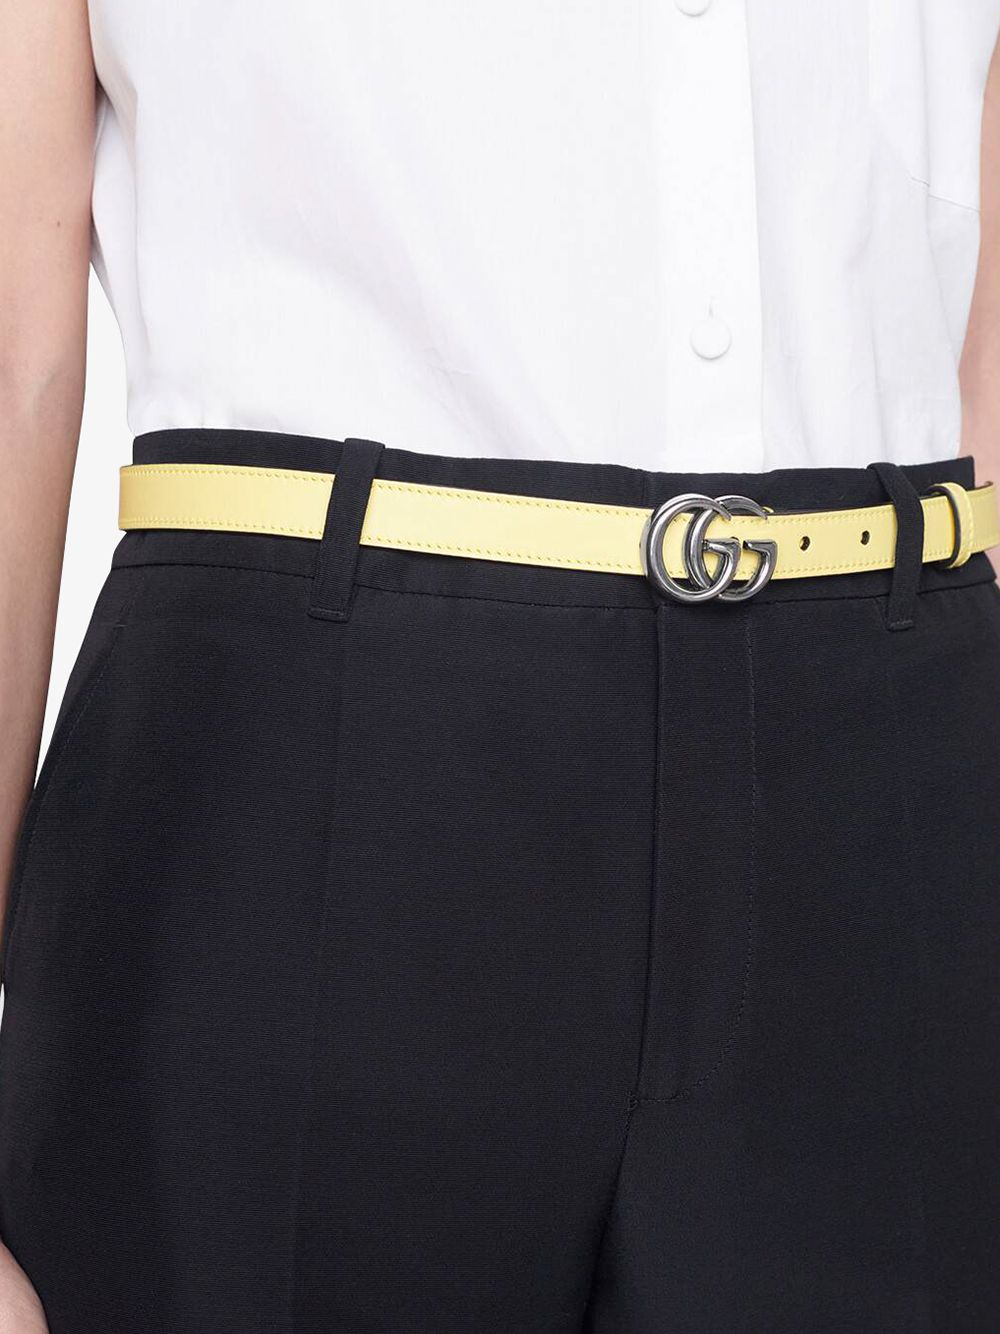 Shop Gucci Double G buckle belt with Express Delivery - FARFETCH